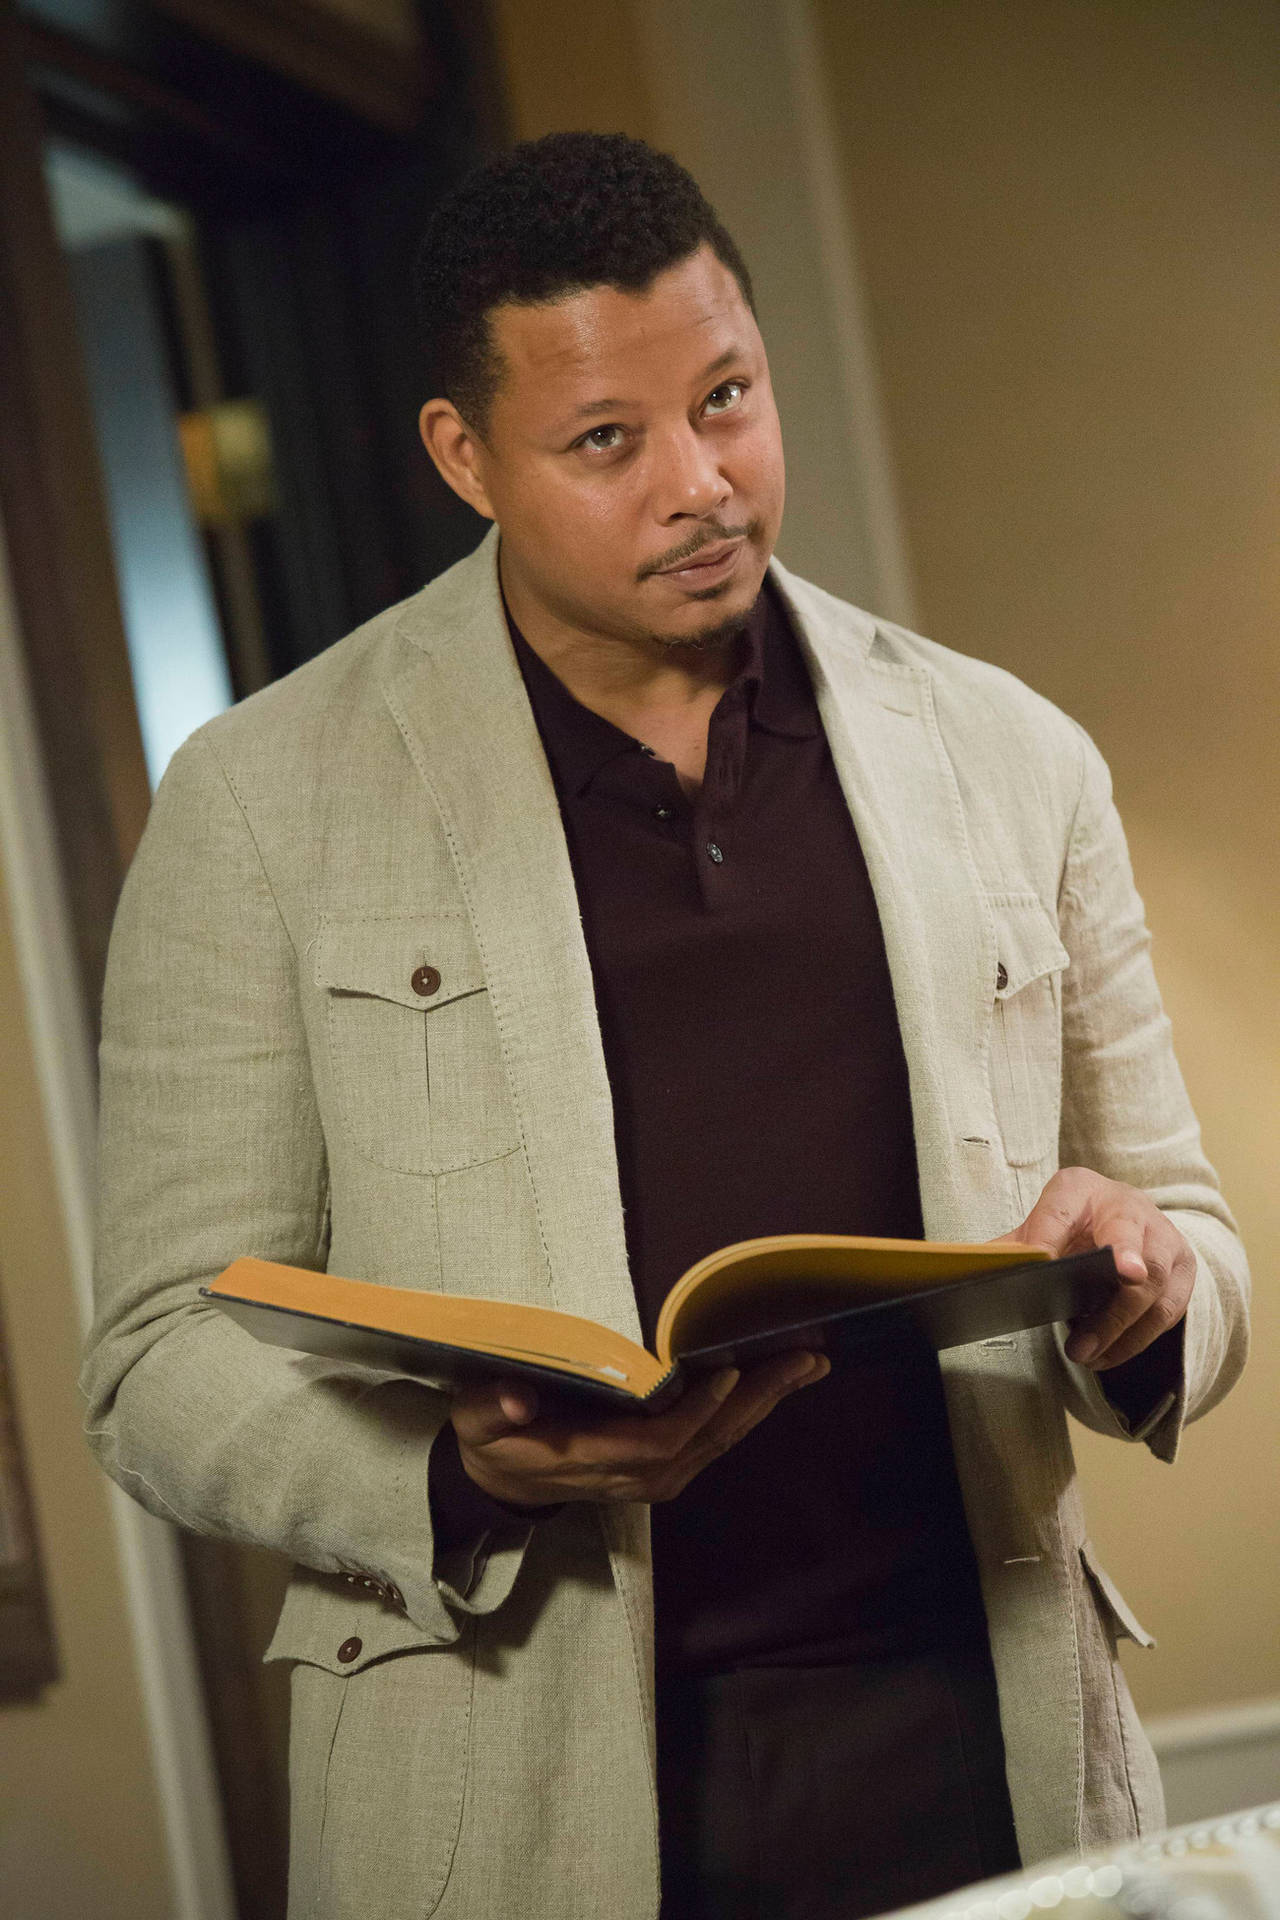 Terrence Howard In Empire Series With A Book Wallpaper